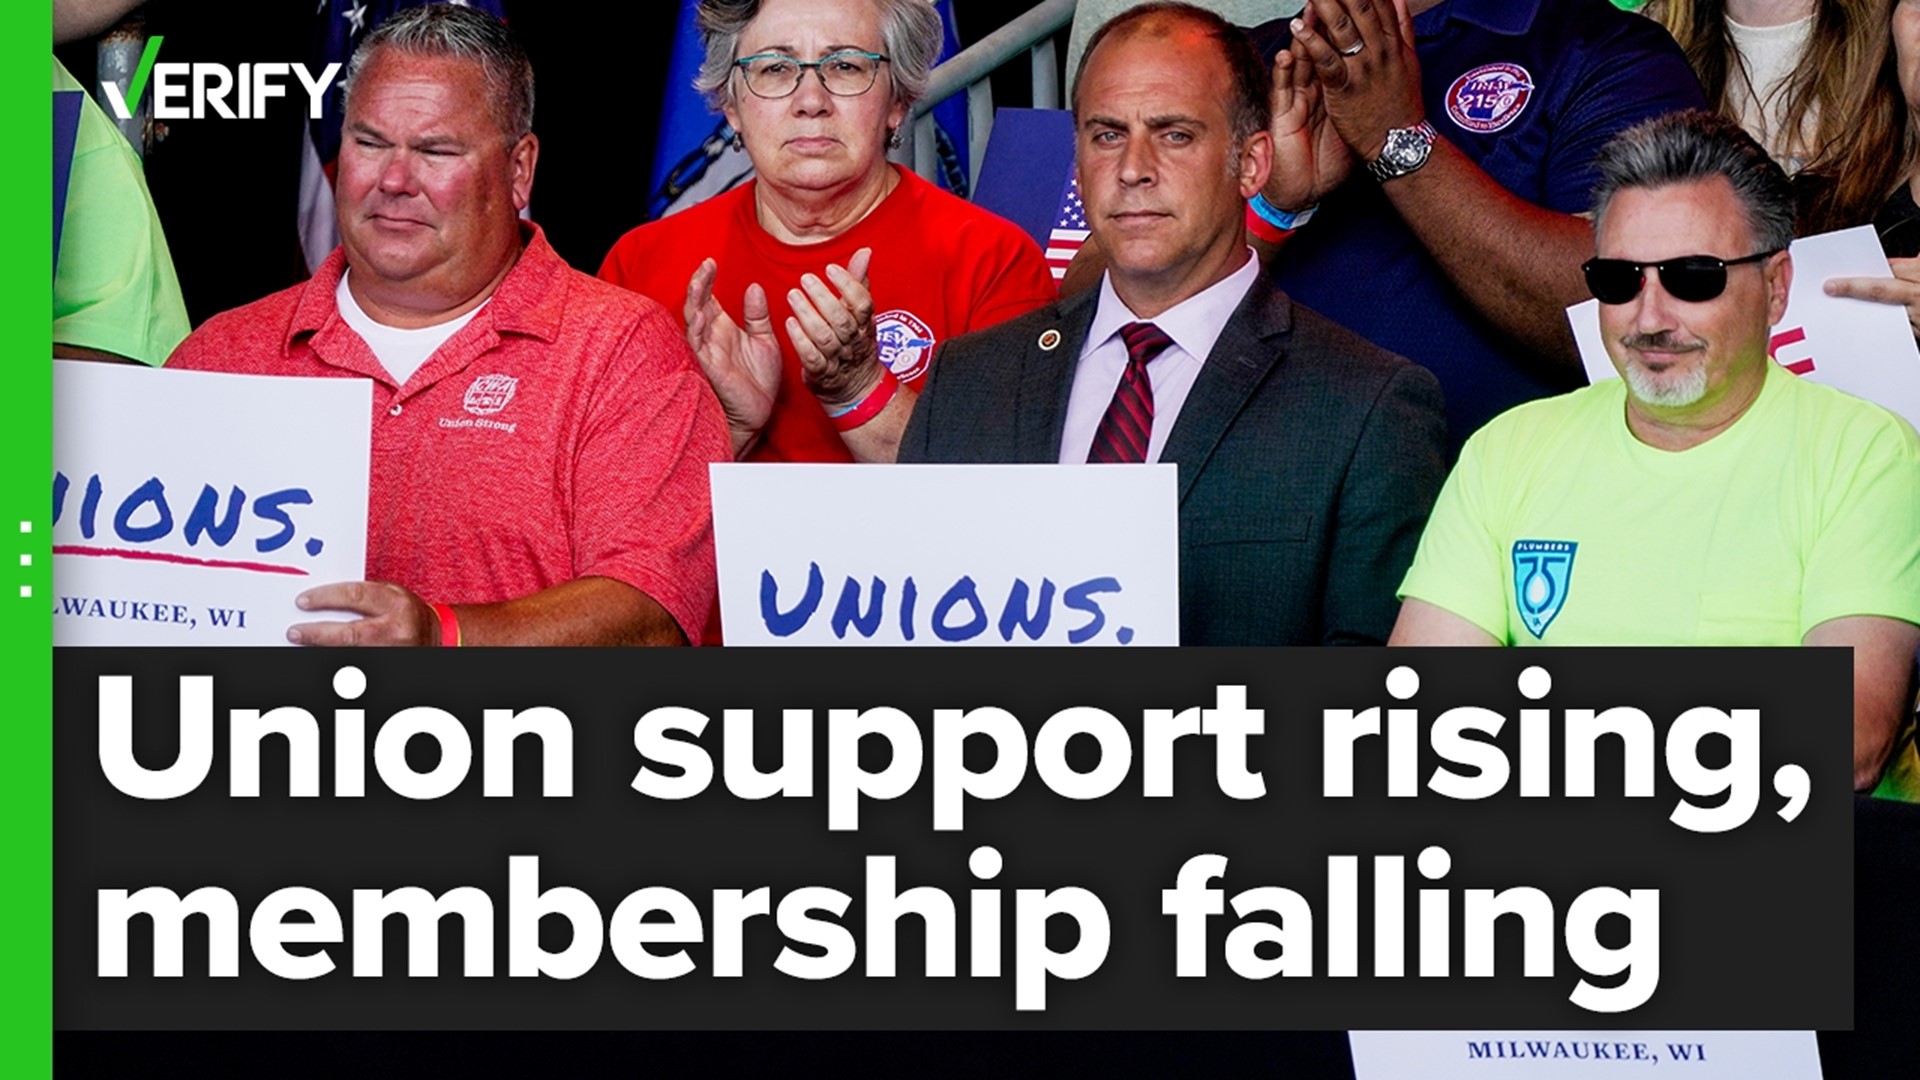 A new poll shows more Americans support labor unions than have in decades. But data shows union membership remains at historic lows.